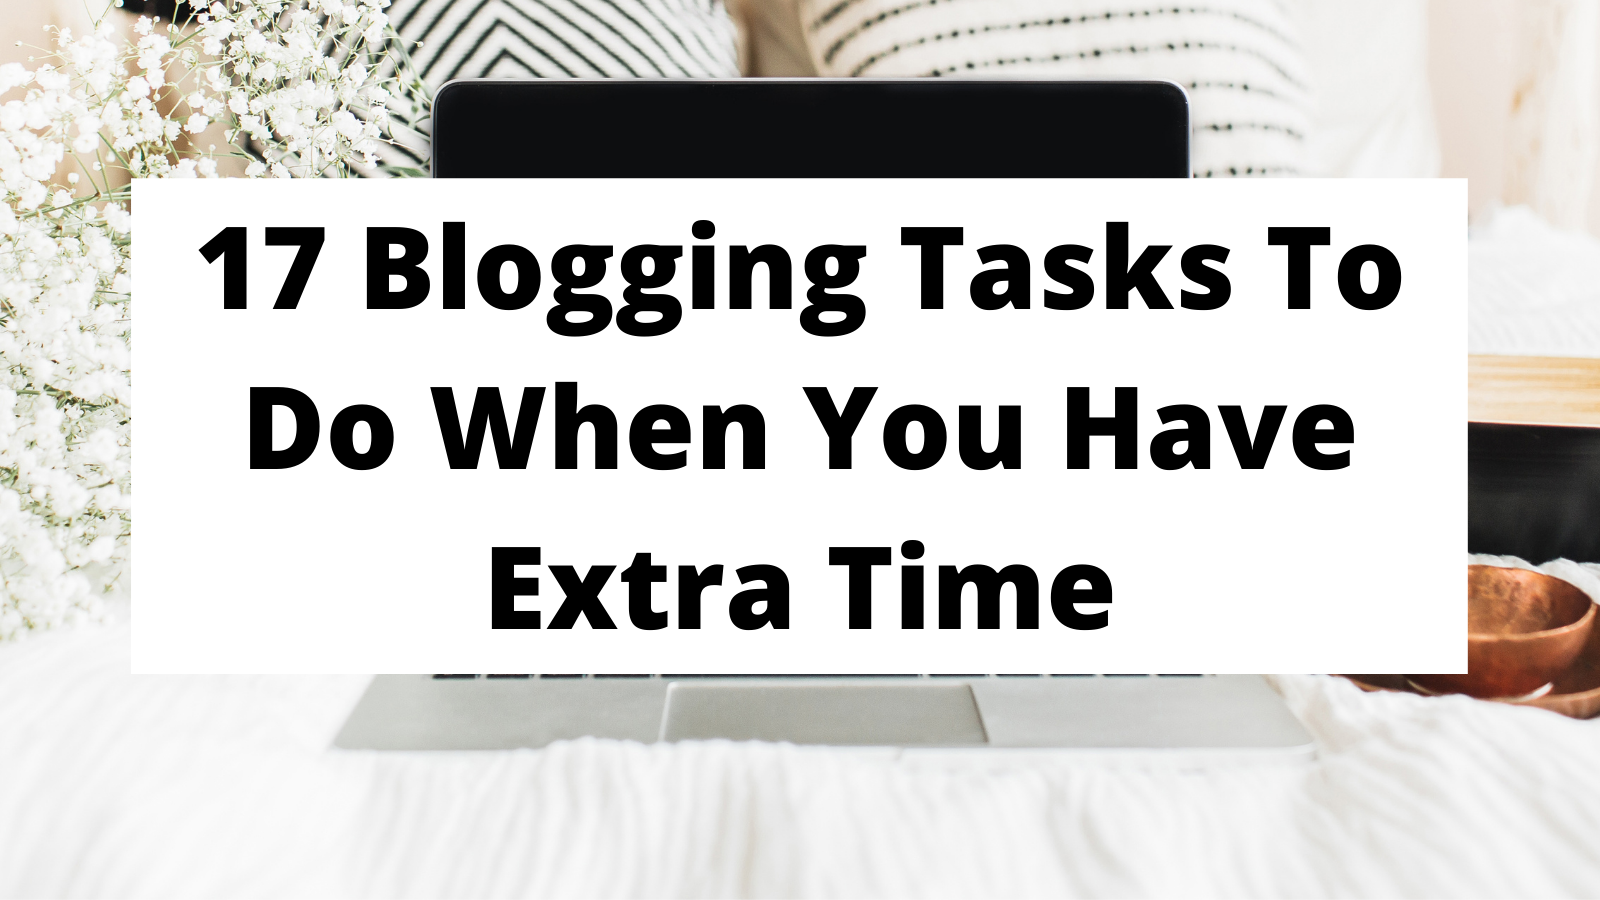 17 Blogging Tasks To Do When You Have Extra Time